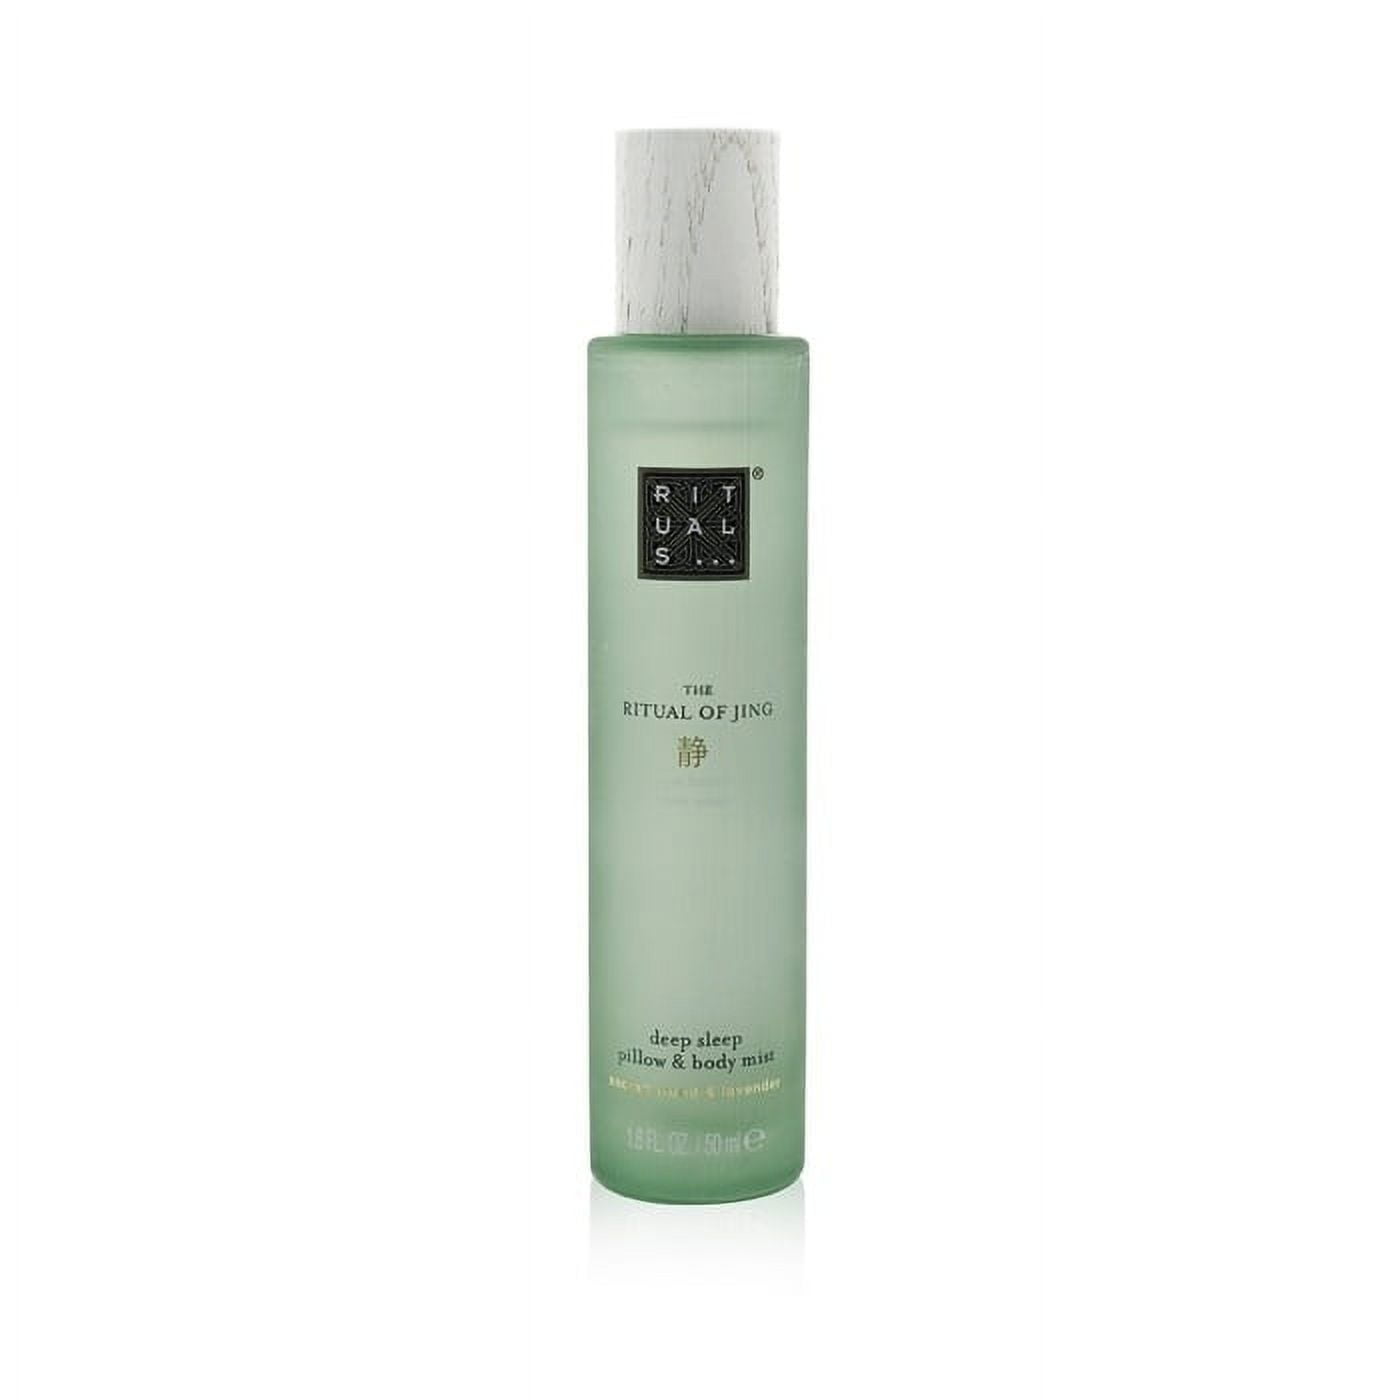 The Ritual of Jing - Relax by Rituals » Reviews & Perfume Facts